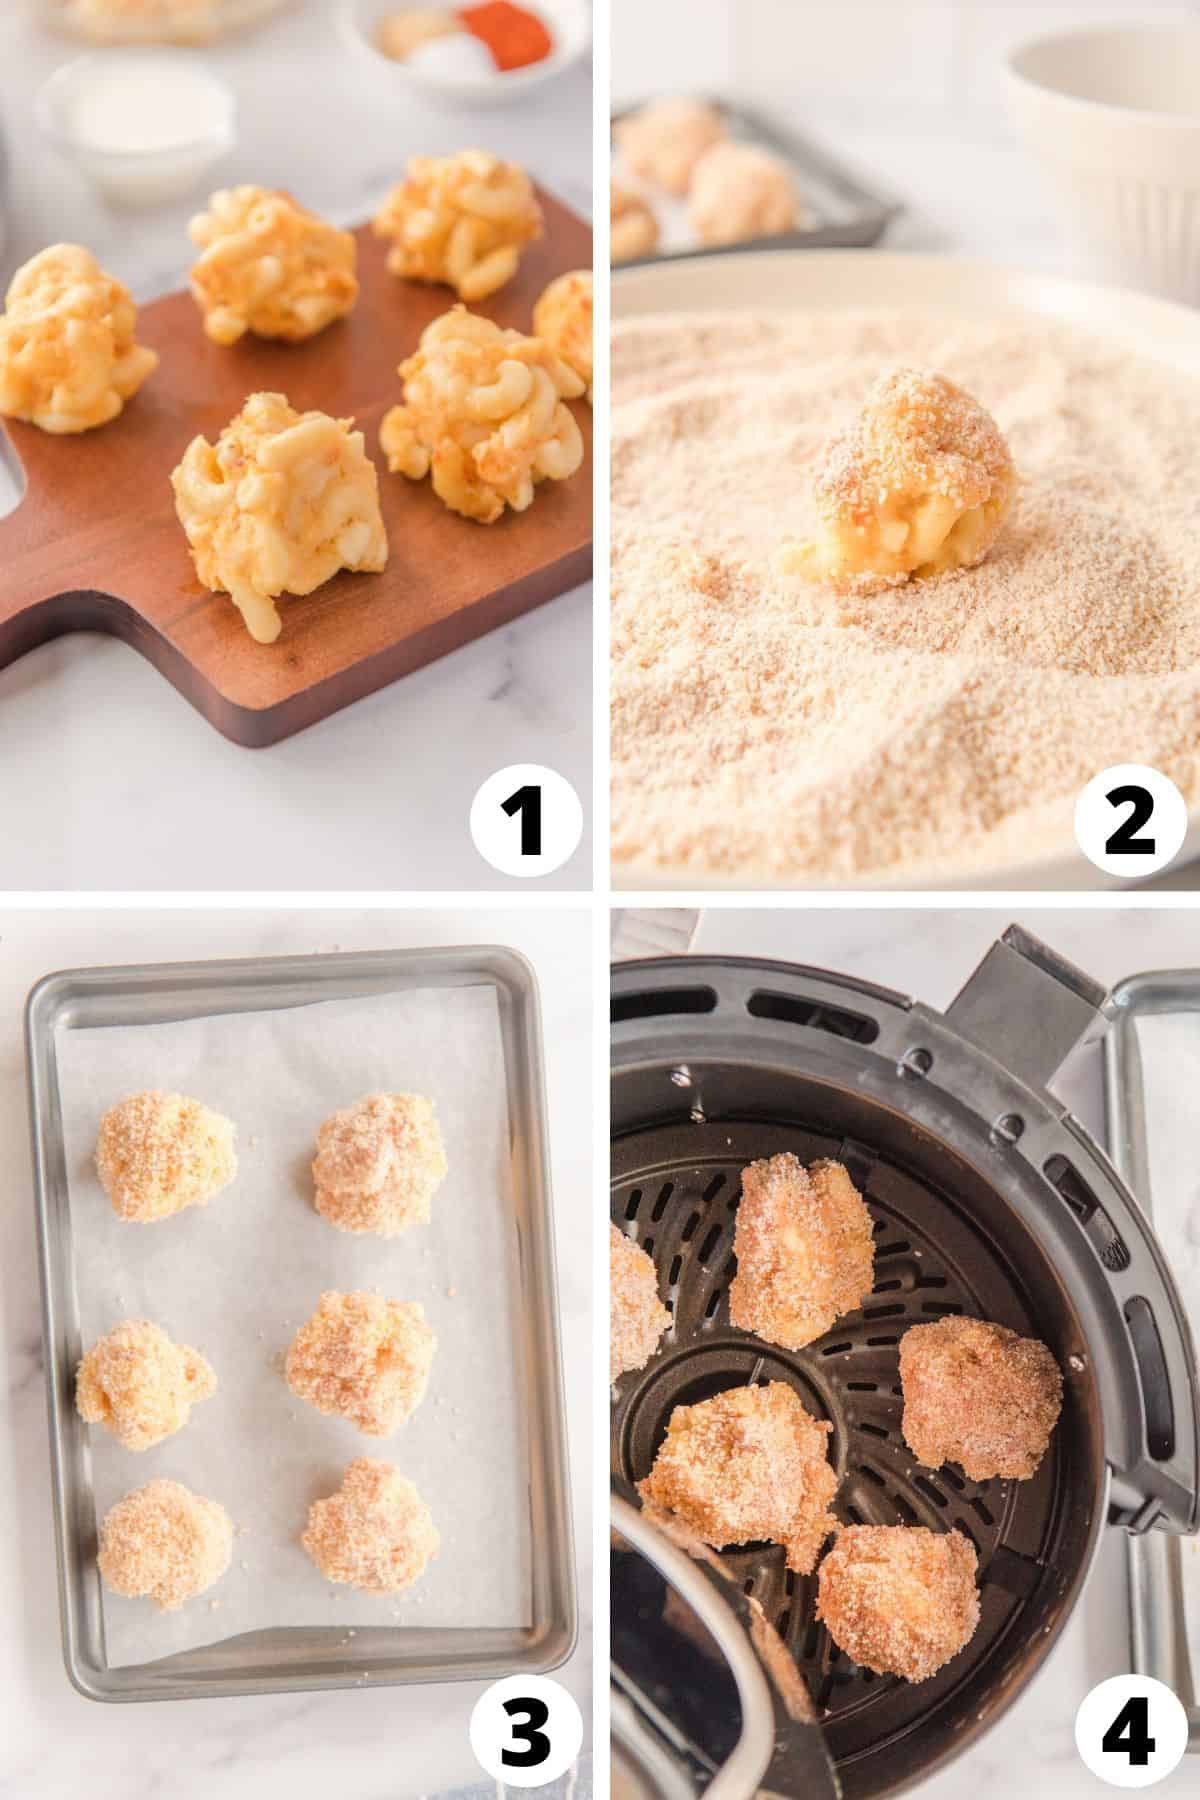 How to Make Macaroni and Cheese Balls in Air Fryer